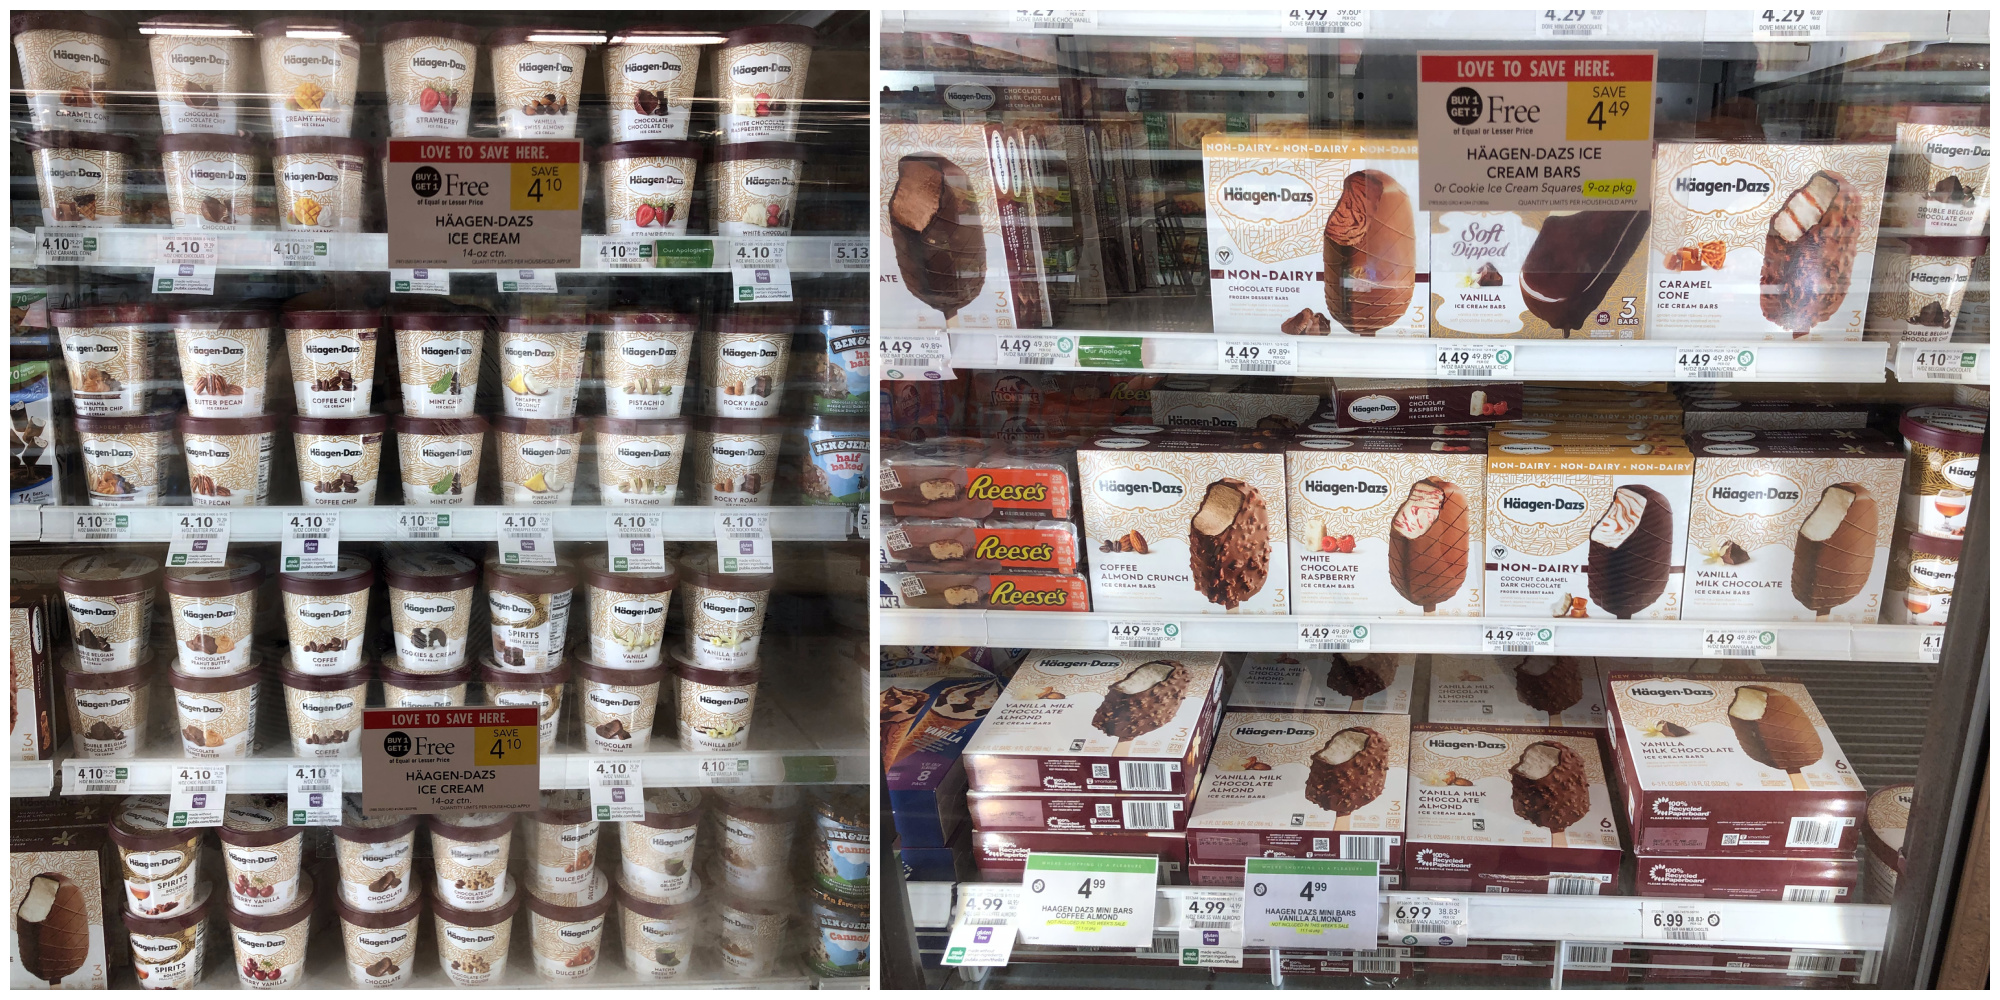 Time To Stock Your Freezer - Your Favorite Häagen-Dazs® Products Are BOGO At Publix on I Heart Publix 1